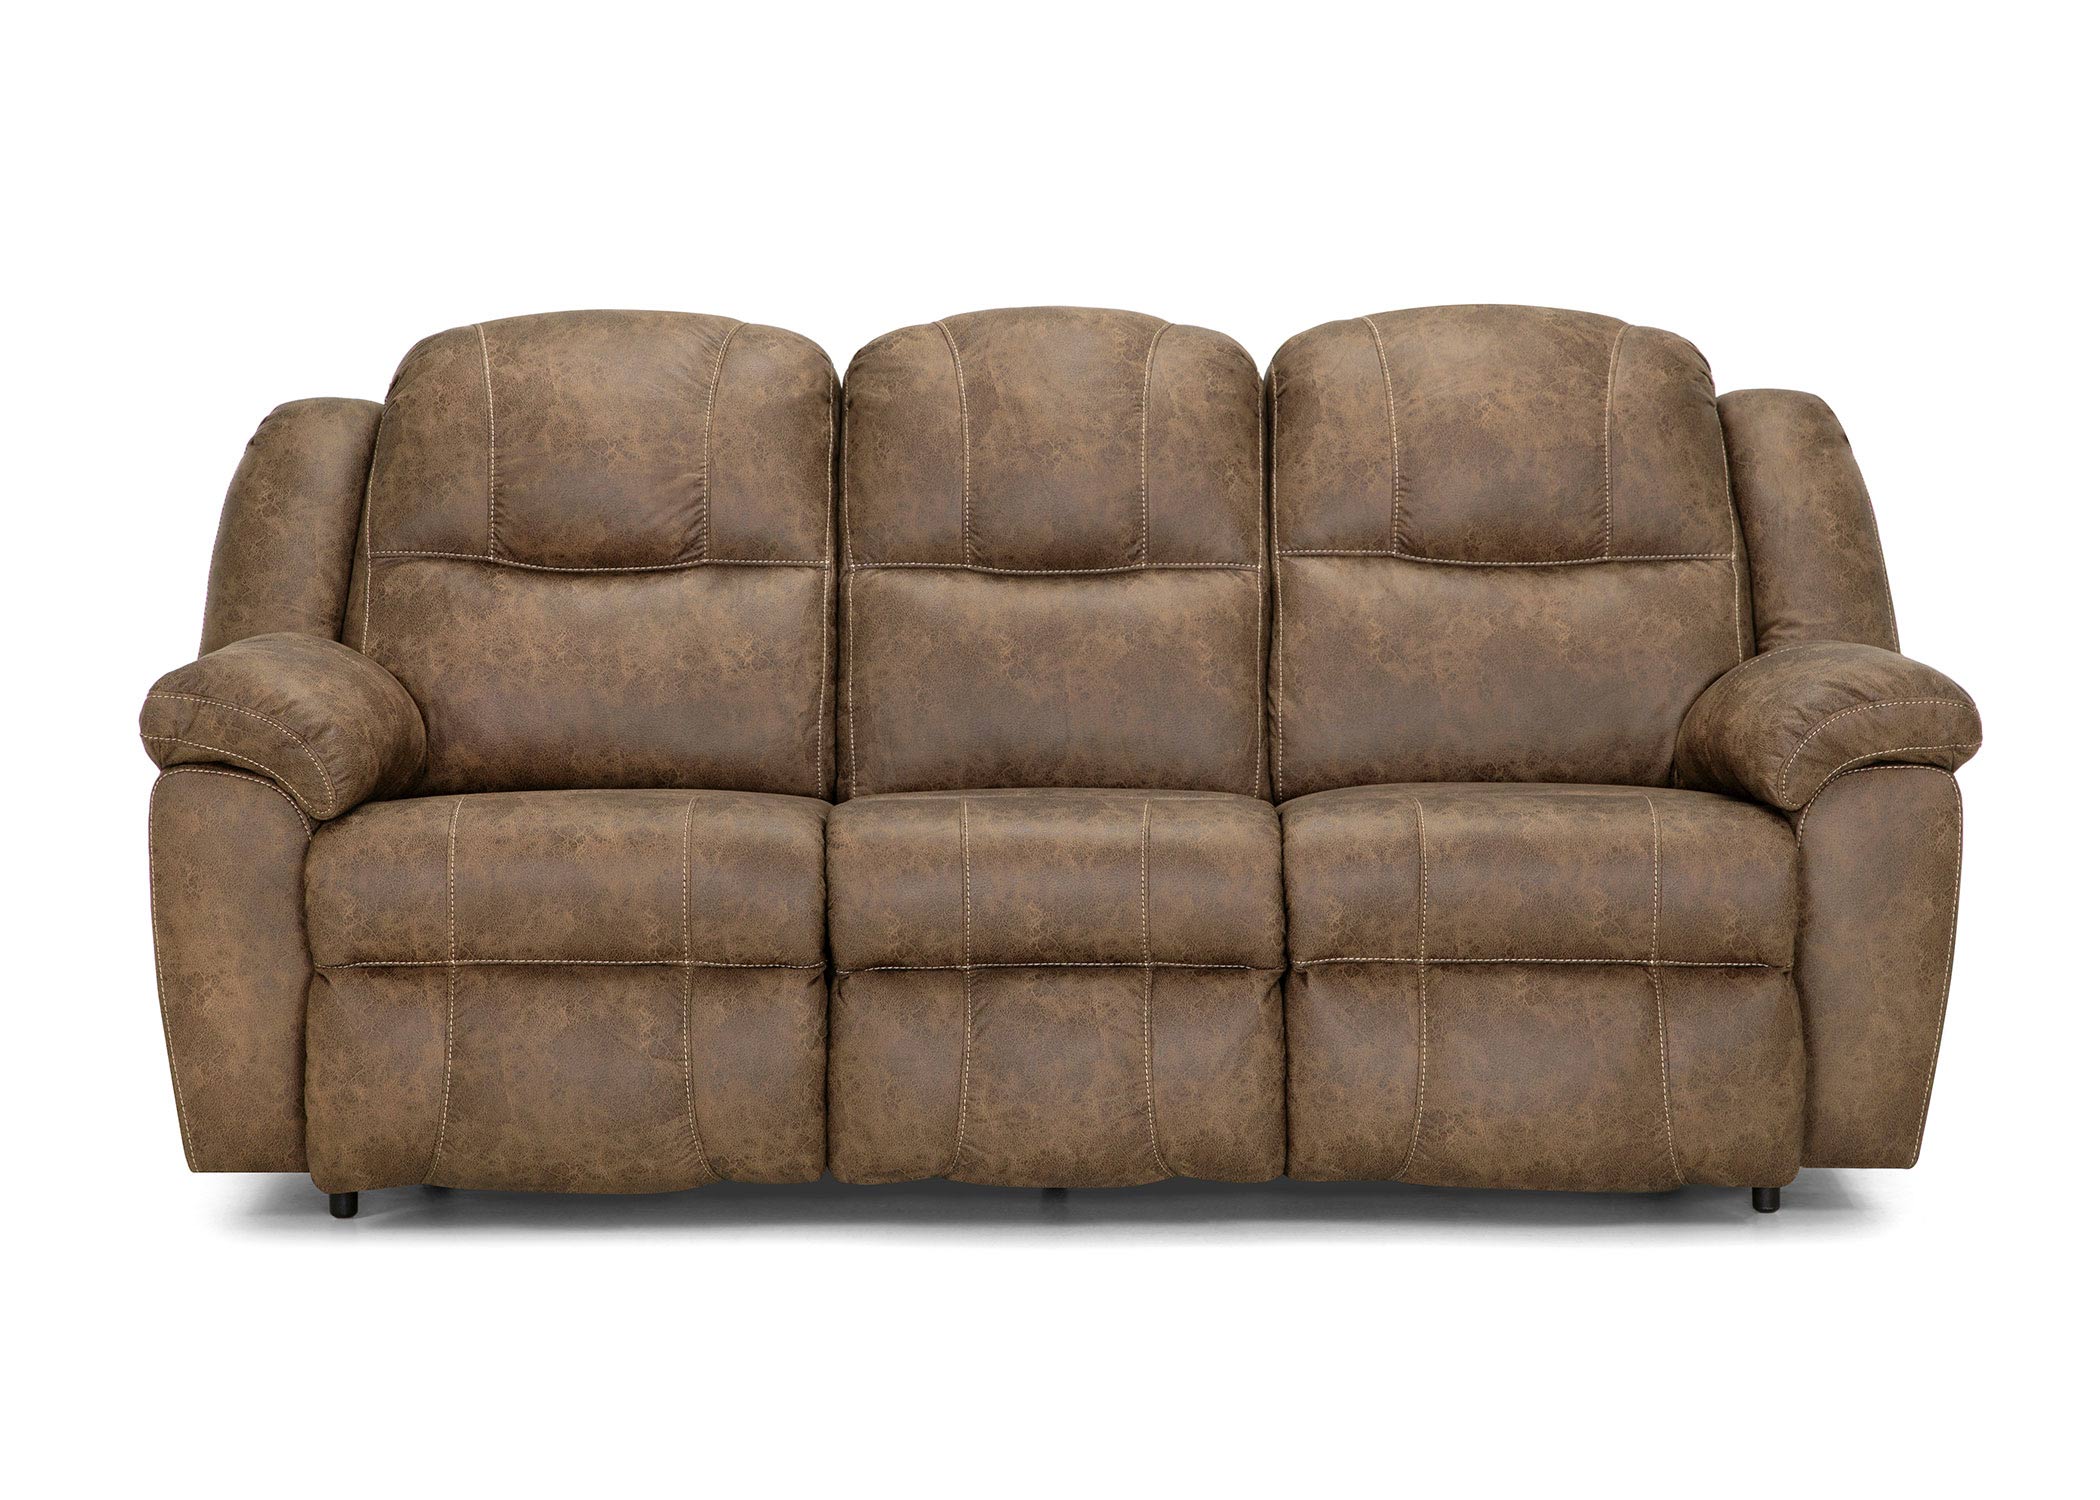  79242 Reclining Sofa - Front View 